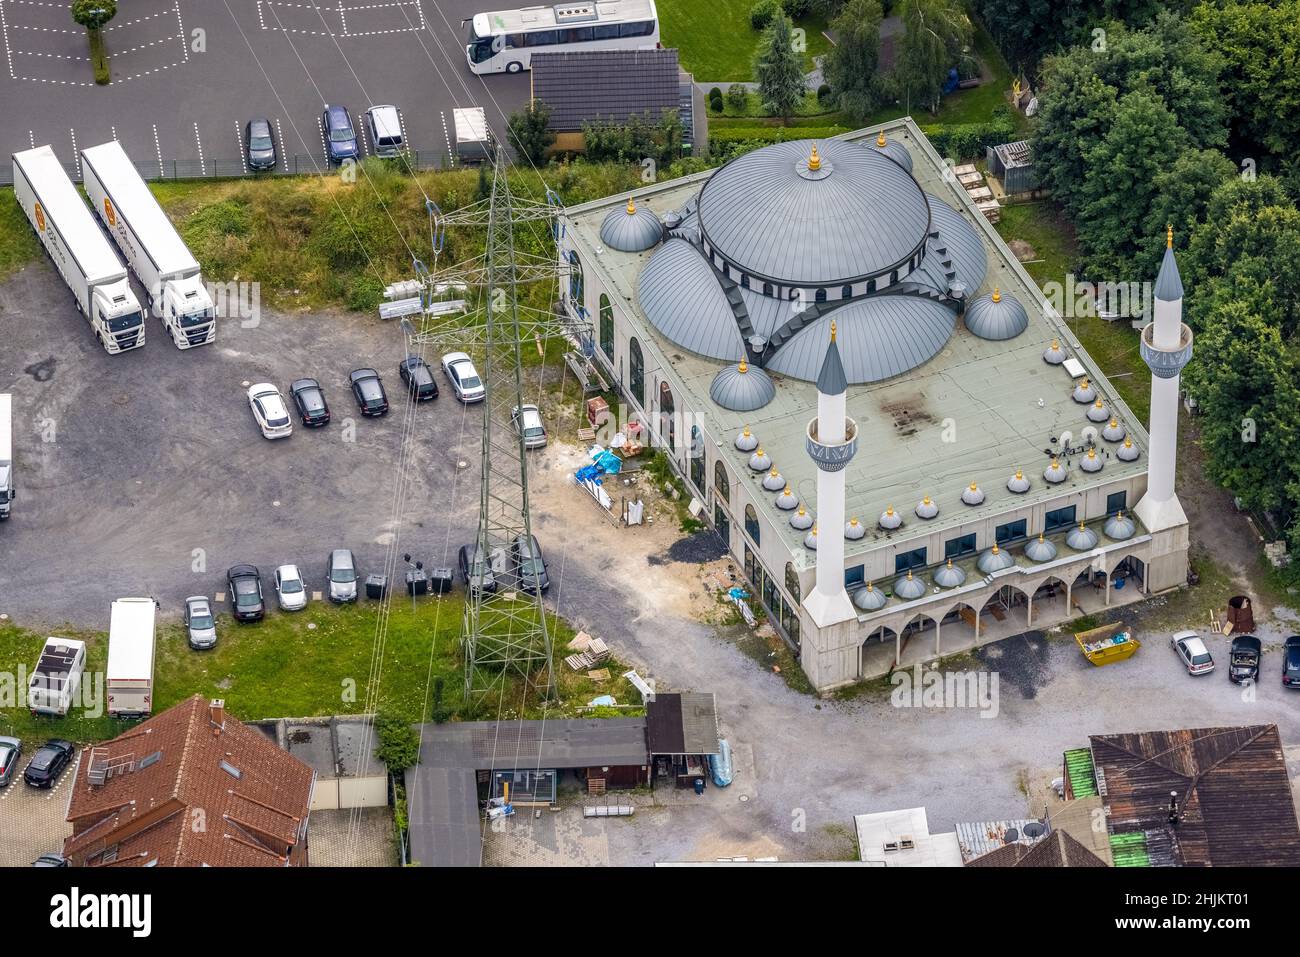 Ulu Mosque High Resolution Stock Photography and Images - Alamy